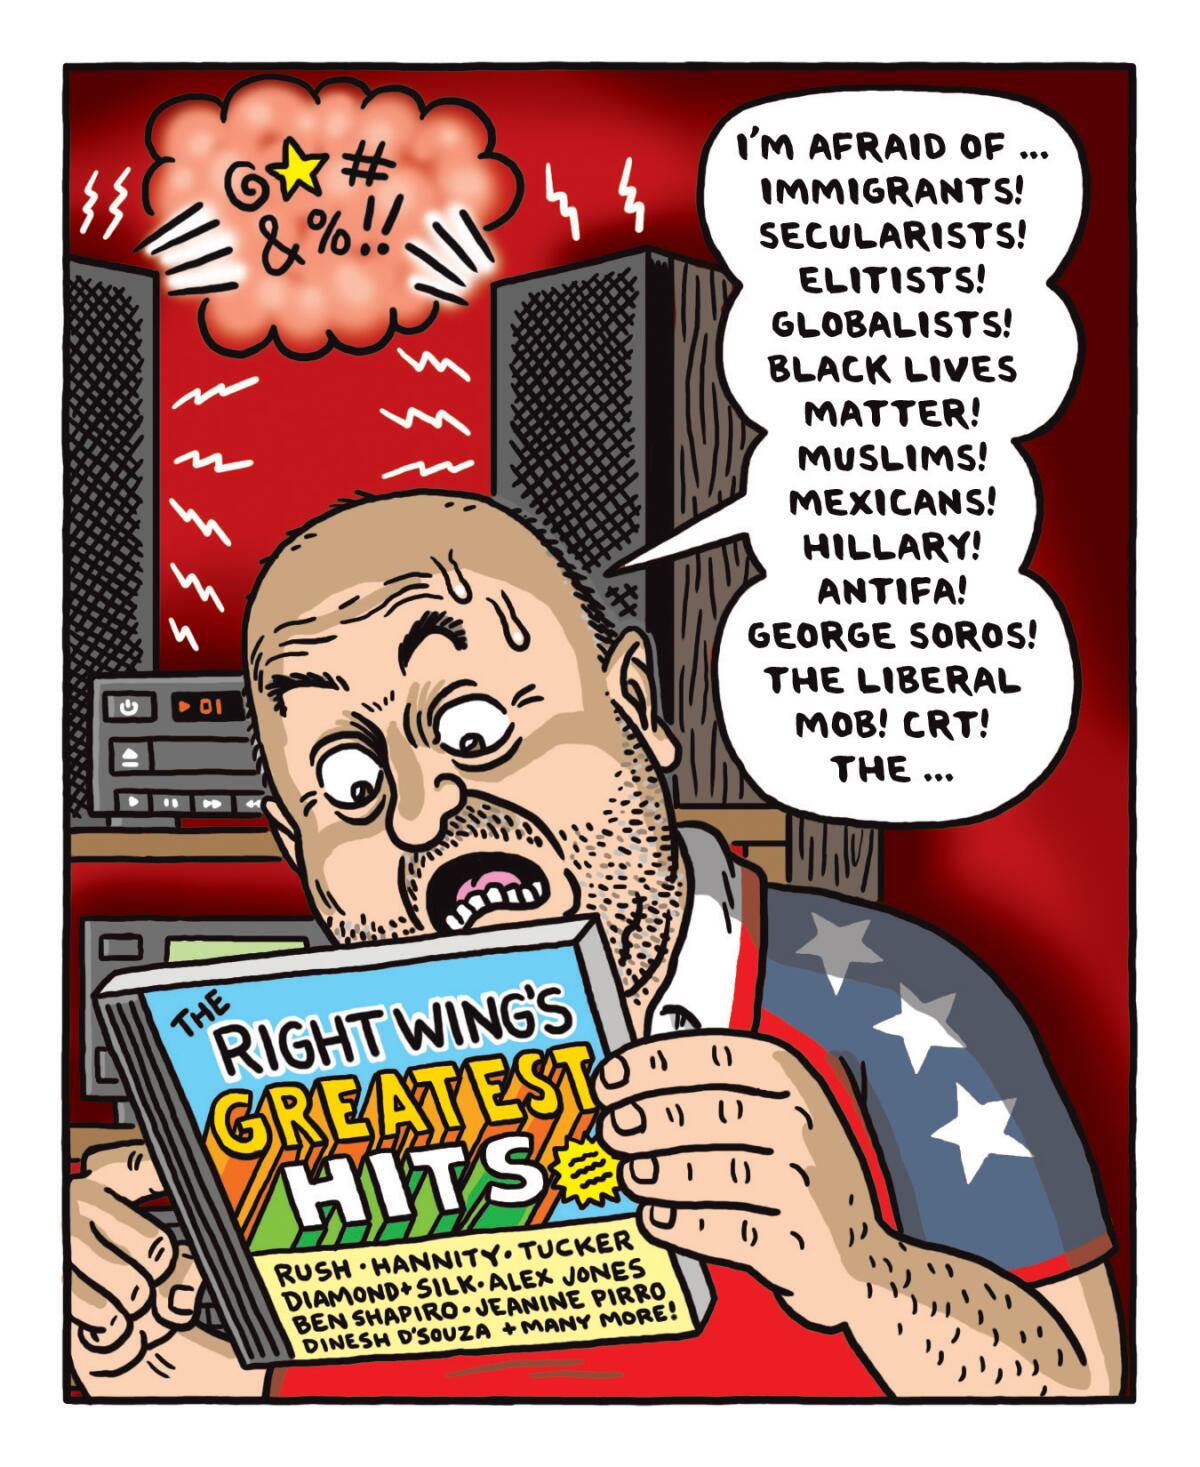 Illustration of a bald man in a patriotic shirt sweating as he reads back of a CD labeled "The Right Wing's Greatest Hits"